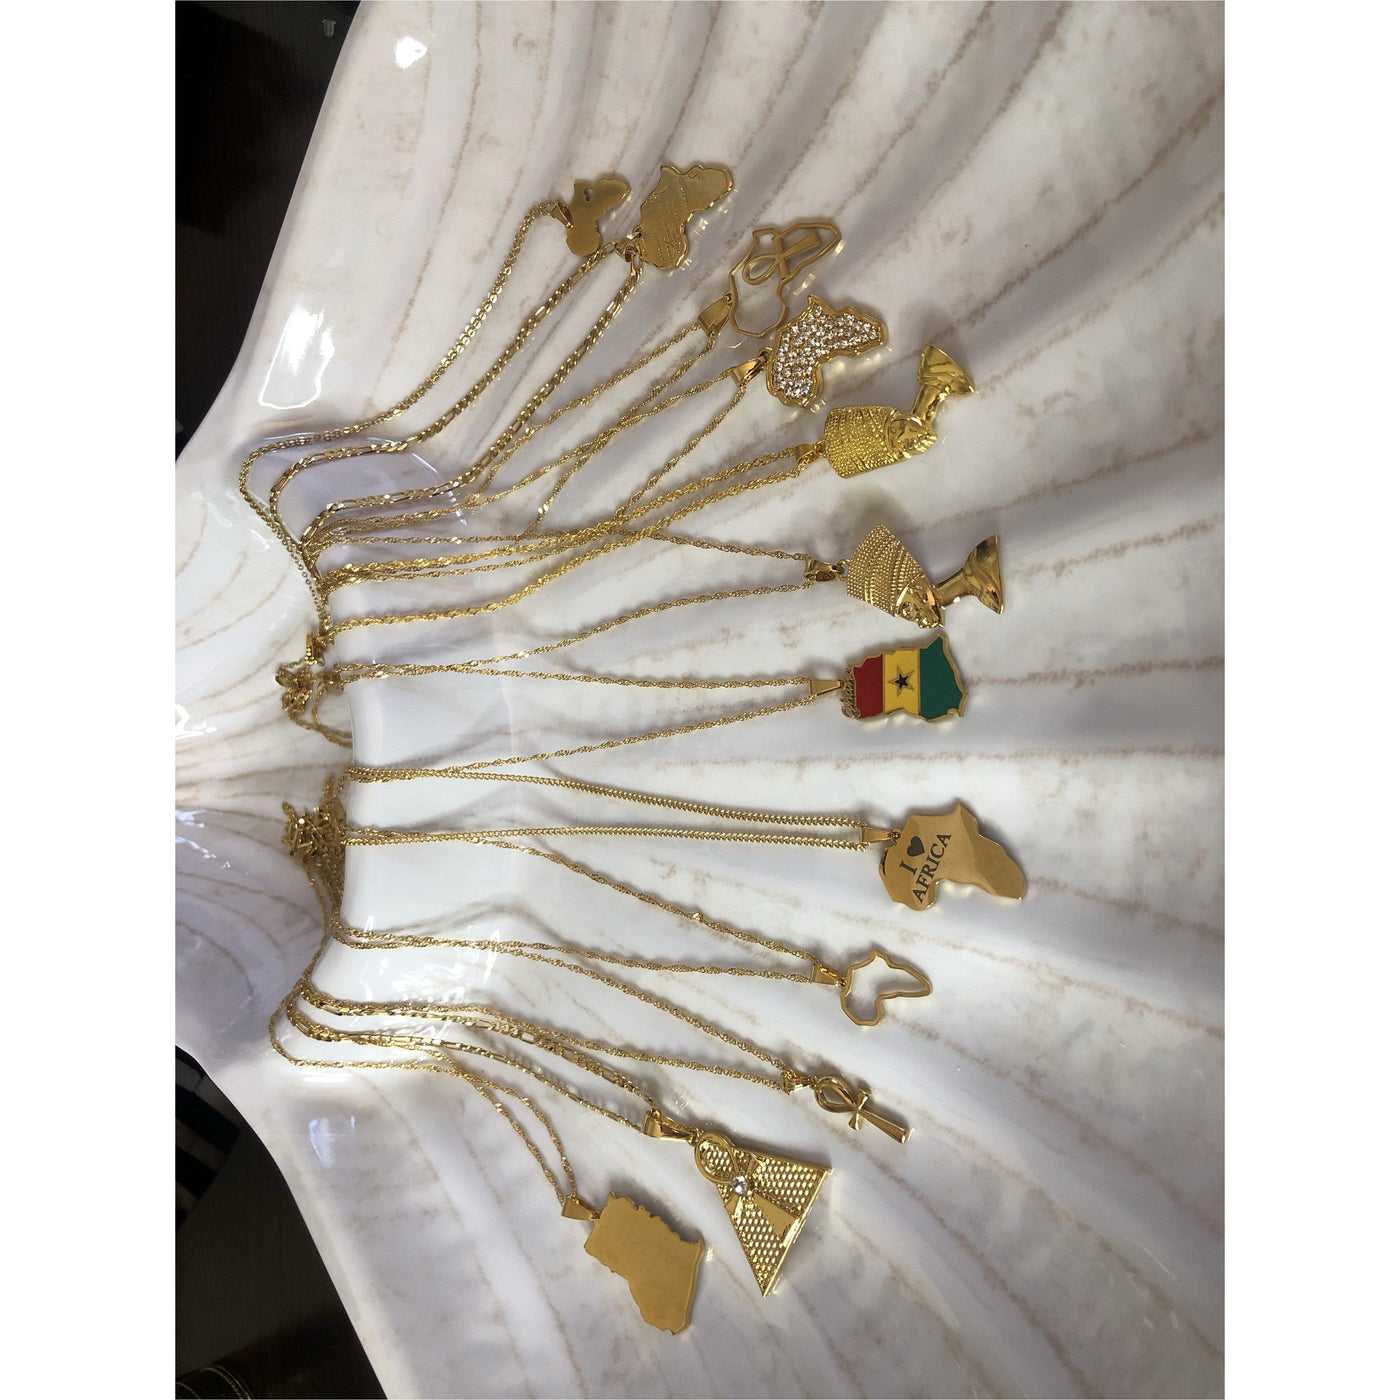 Africa Map & and other Pendant Necklaces - Trufacebygrace